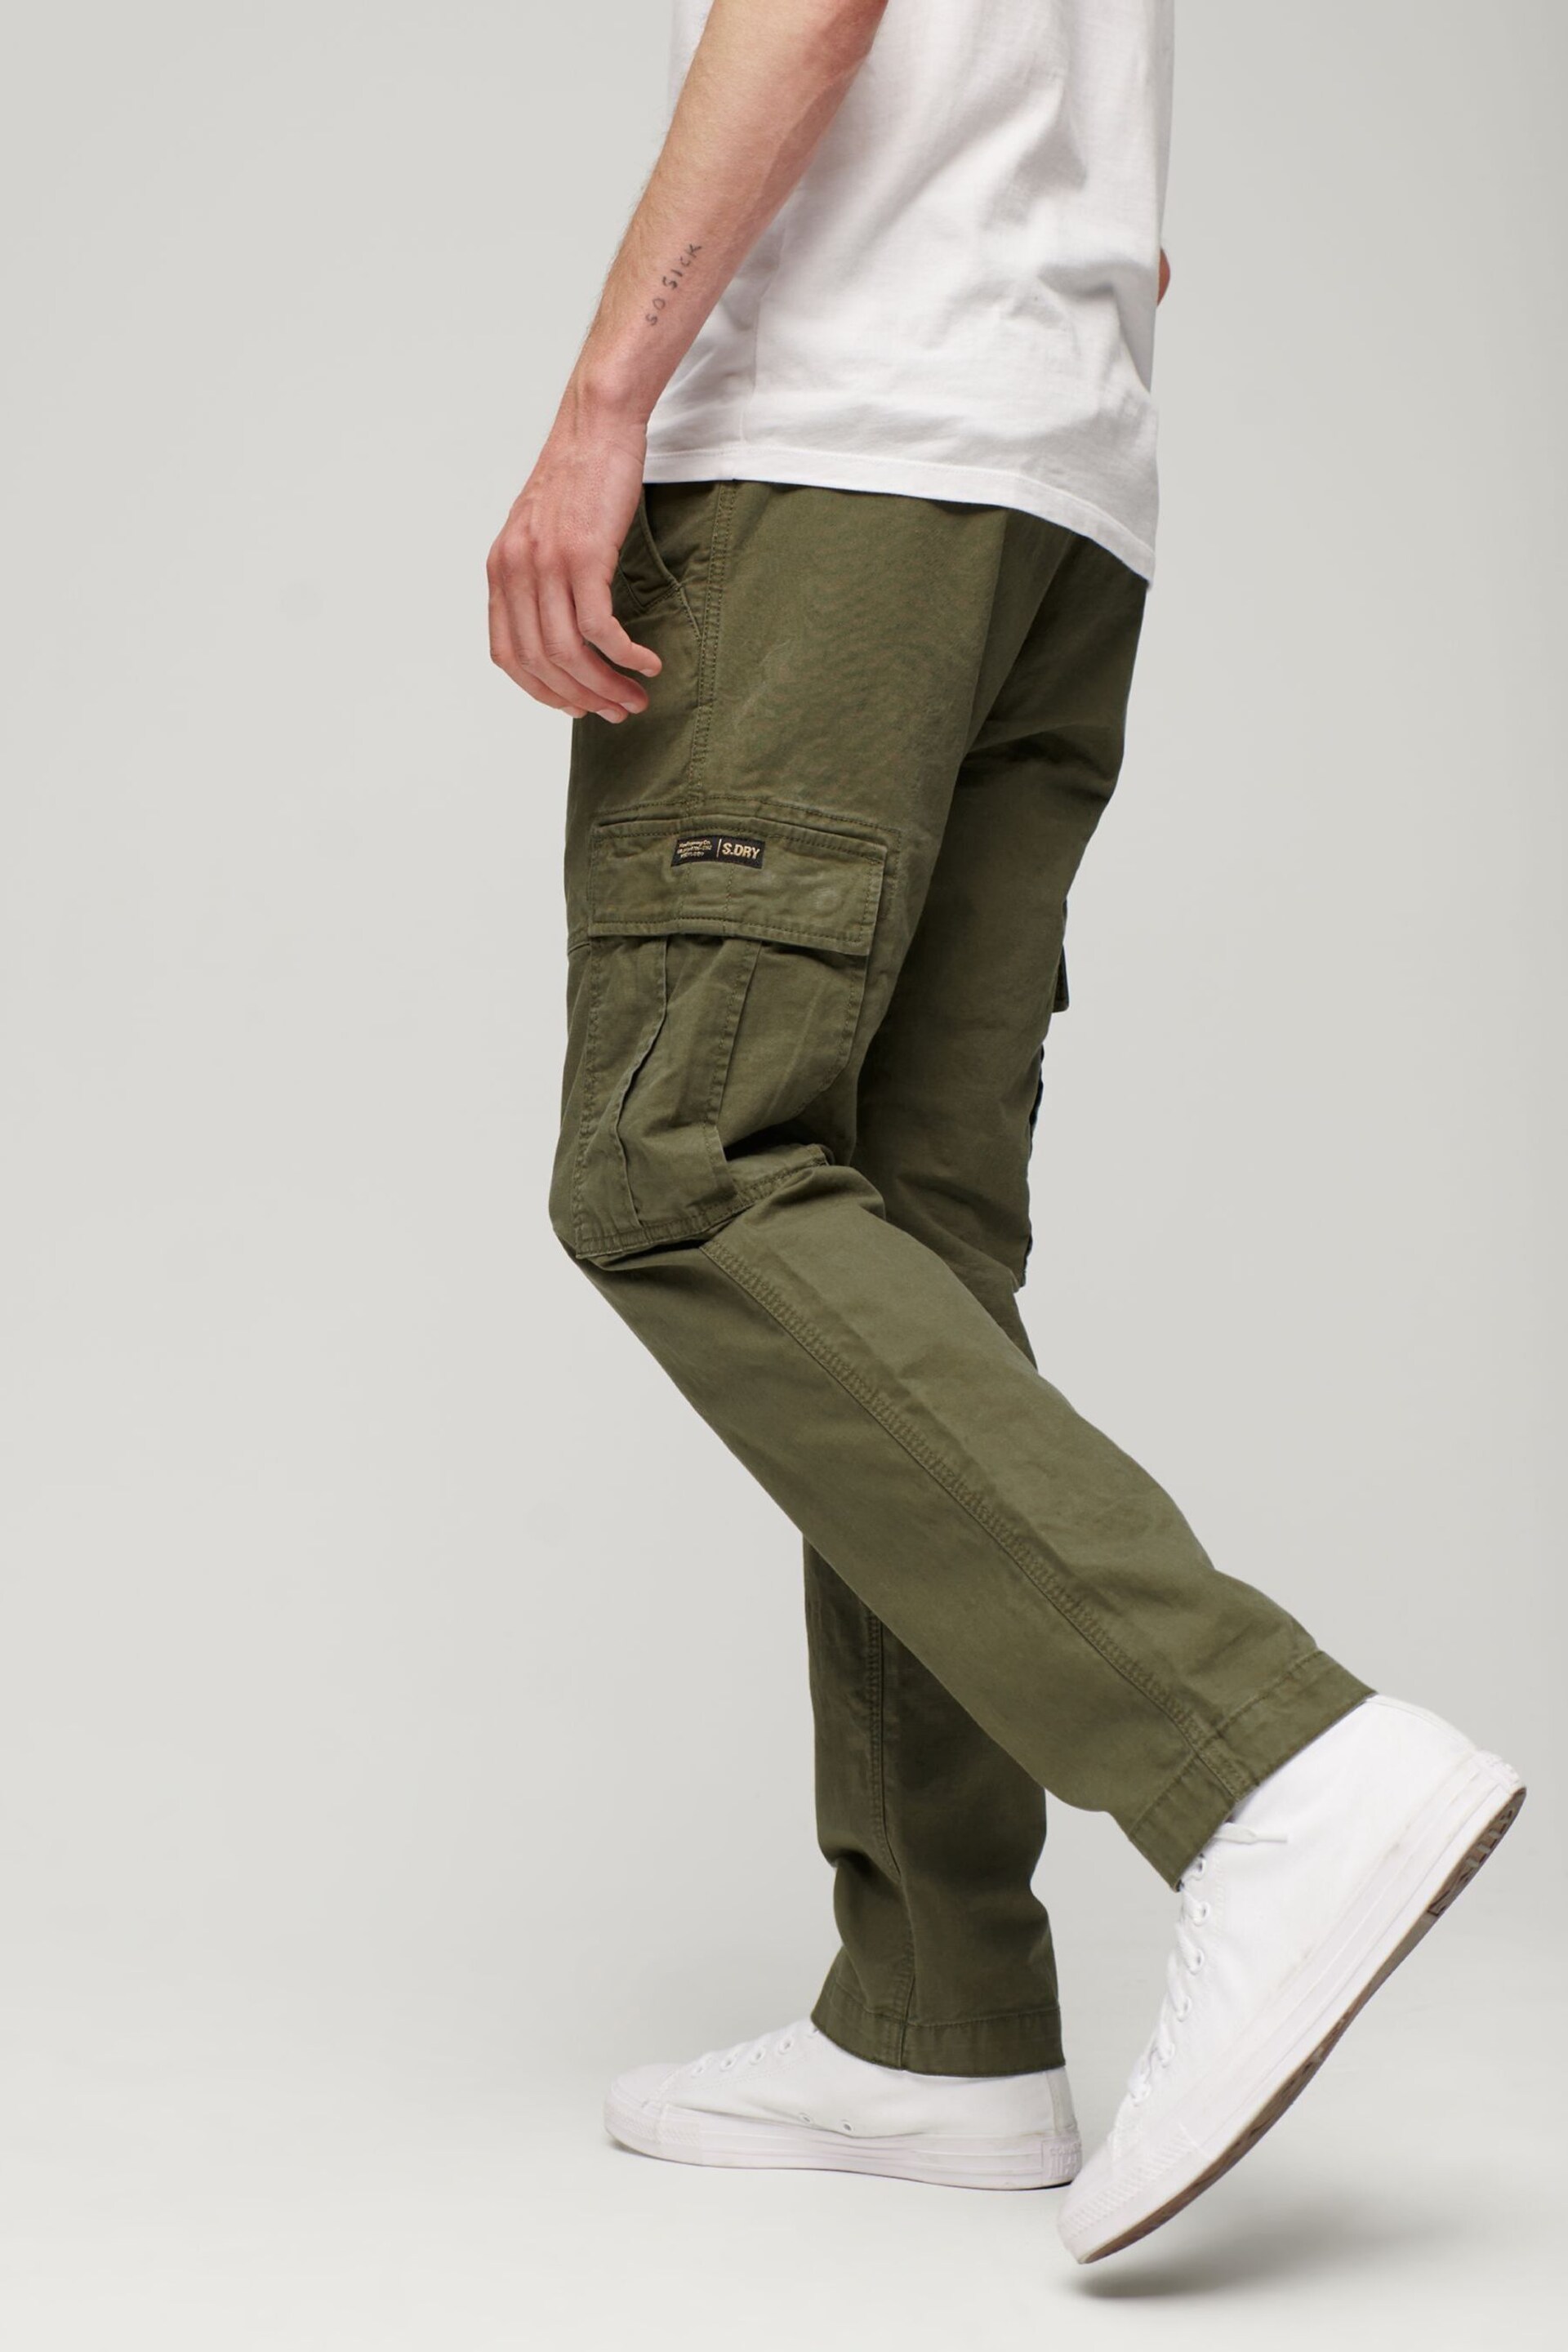 Superdry Green Core Cargo Trousers - Image 1 of 7